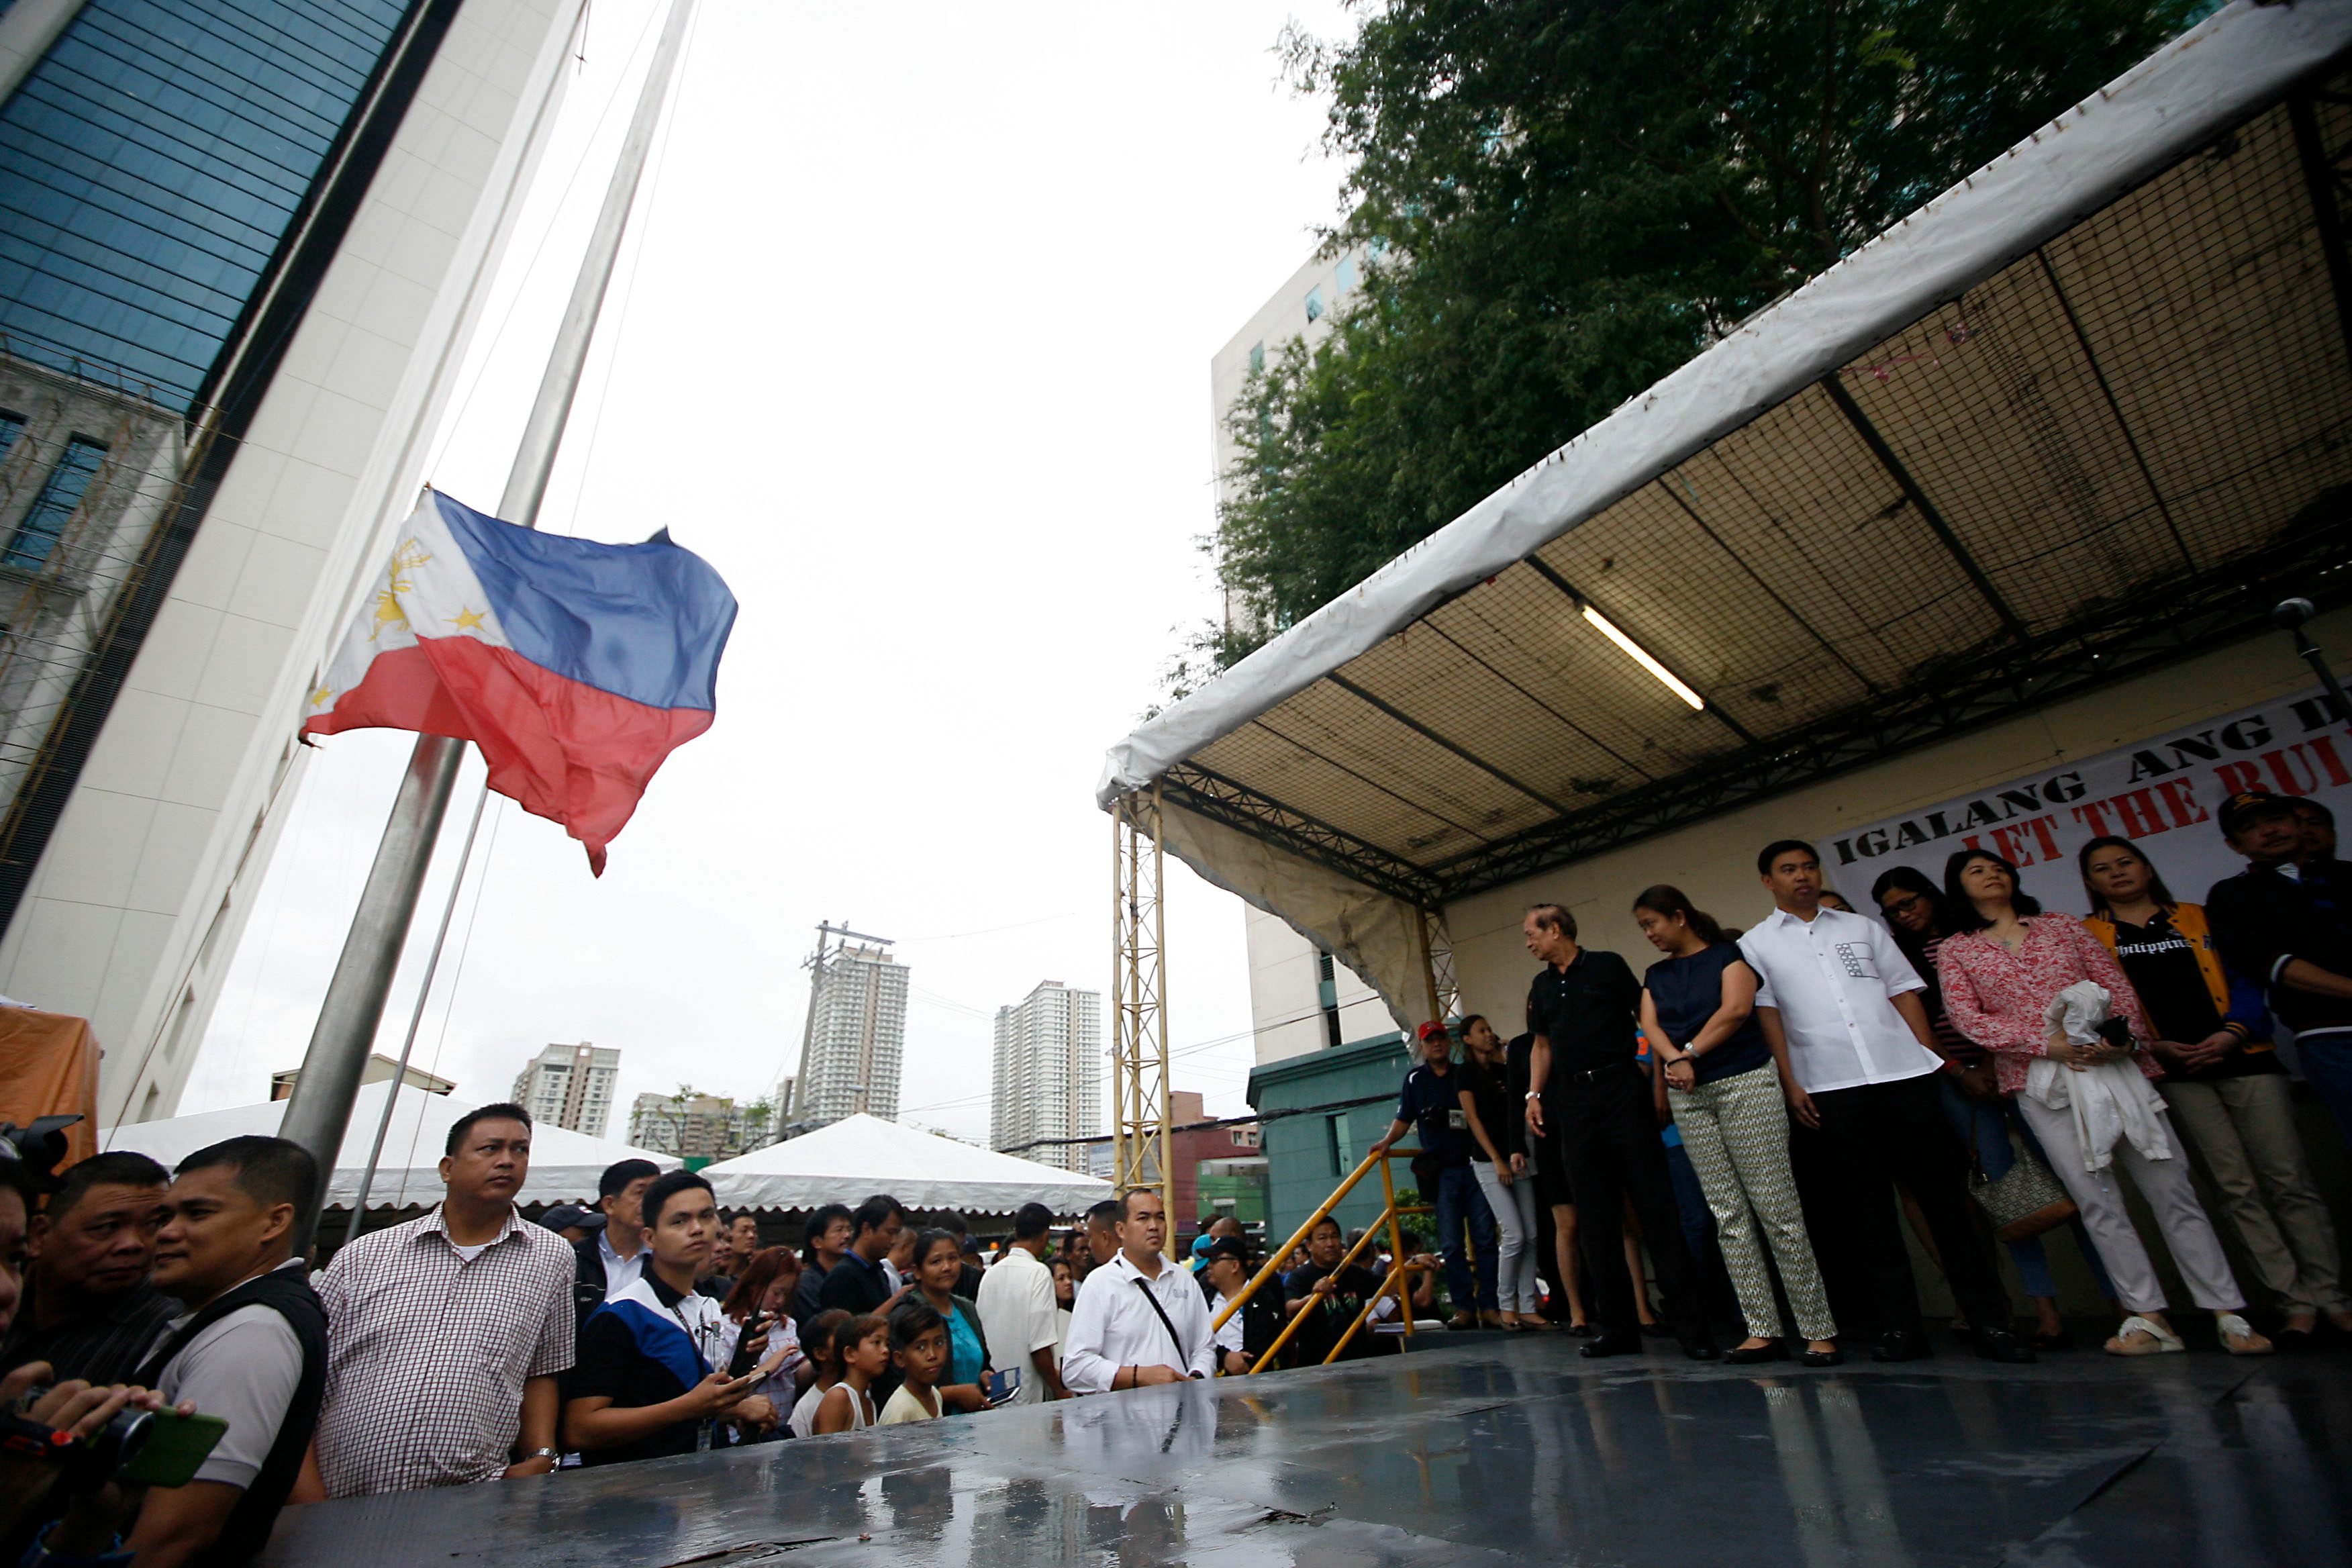 Makati City mayor Junjun Binay attends the flag raising ceremony with sister, Senator Nancy Binay, and other supporters at the new Makati city hall grounds on Monday. Photo by Ben Nabong/Rappler 